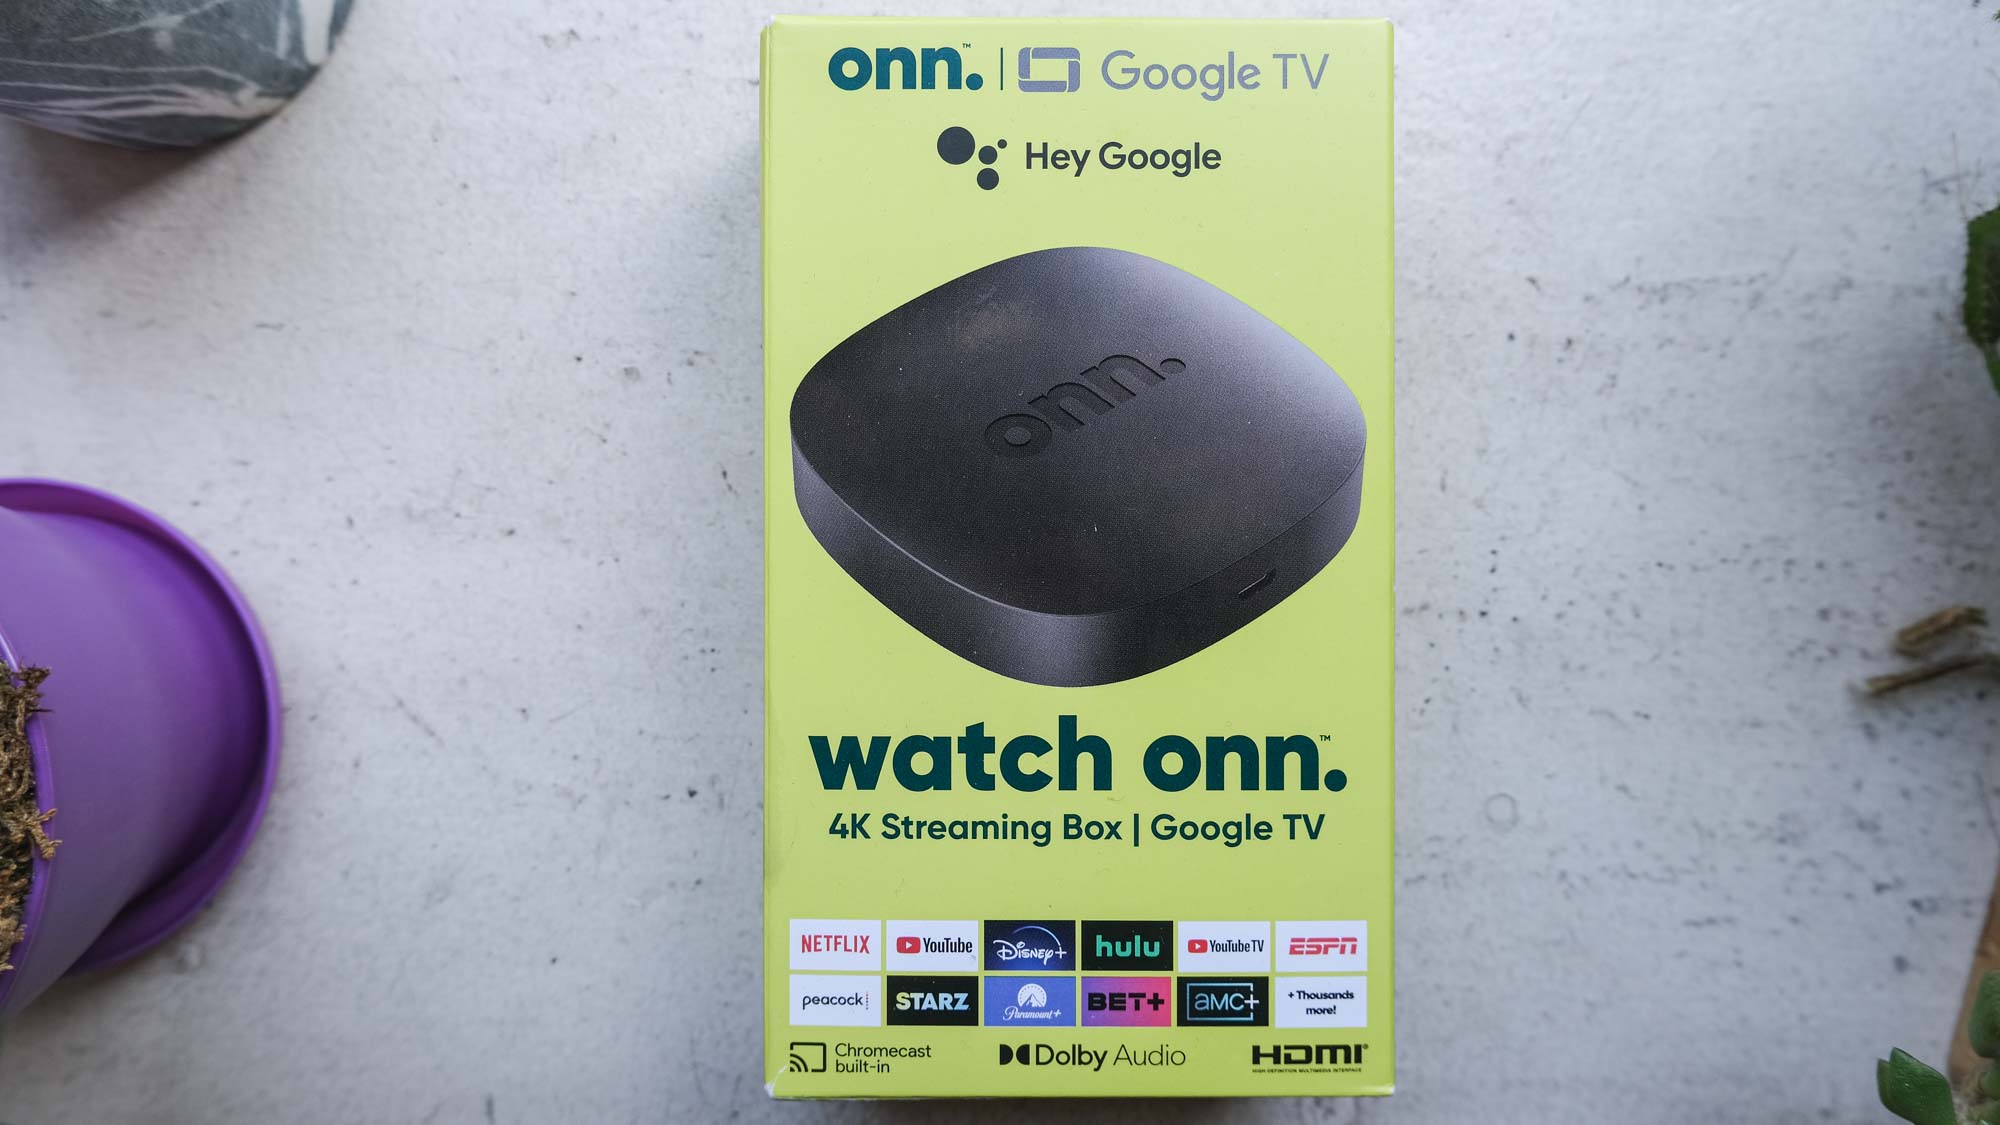 The unopened box of the Google TV 4K Streaming Box